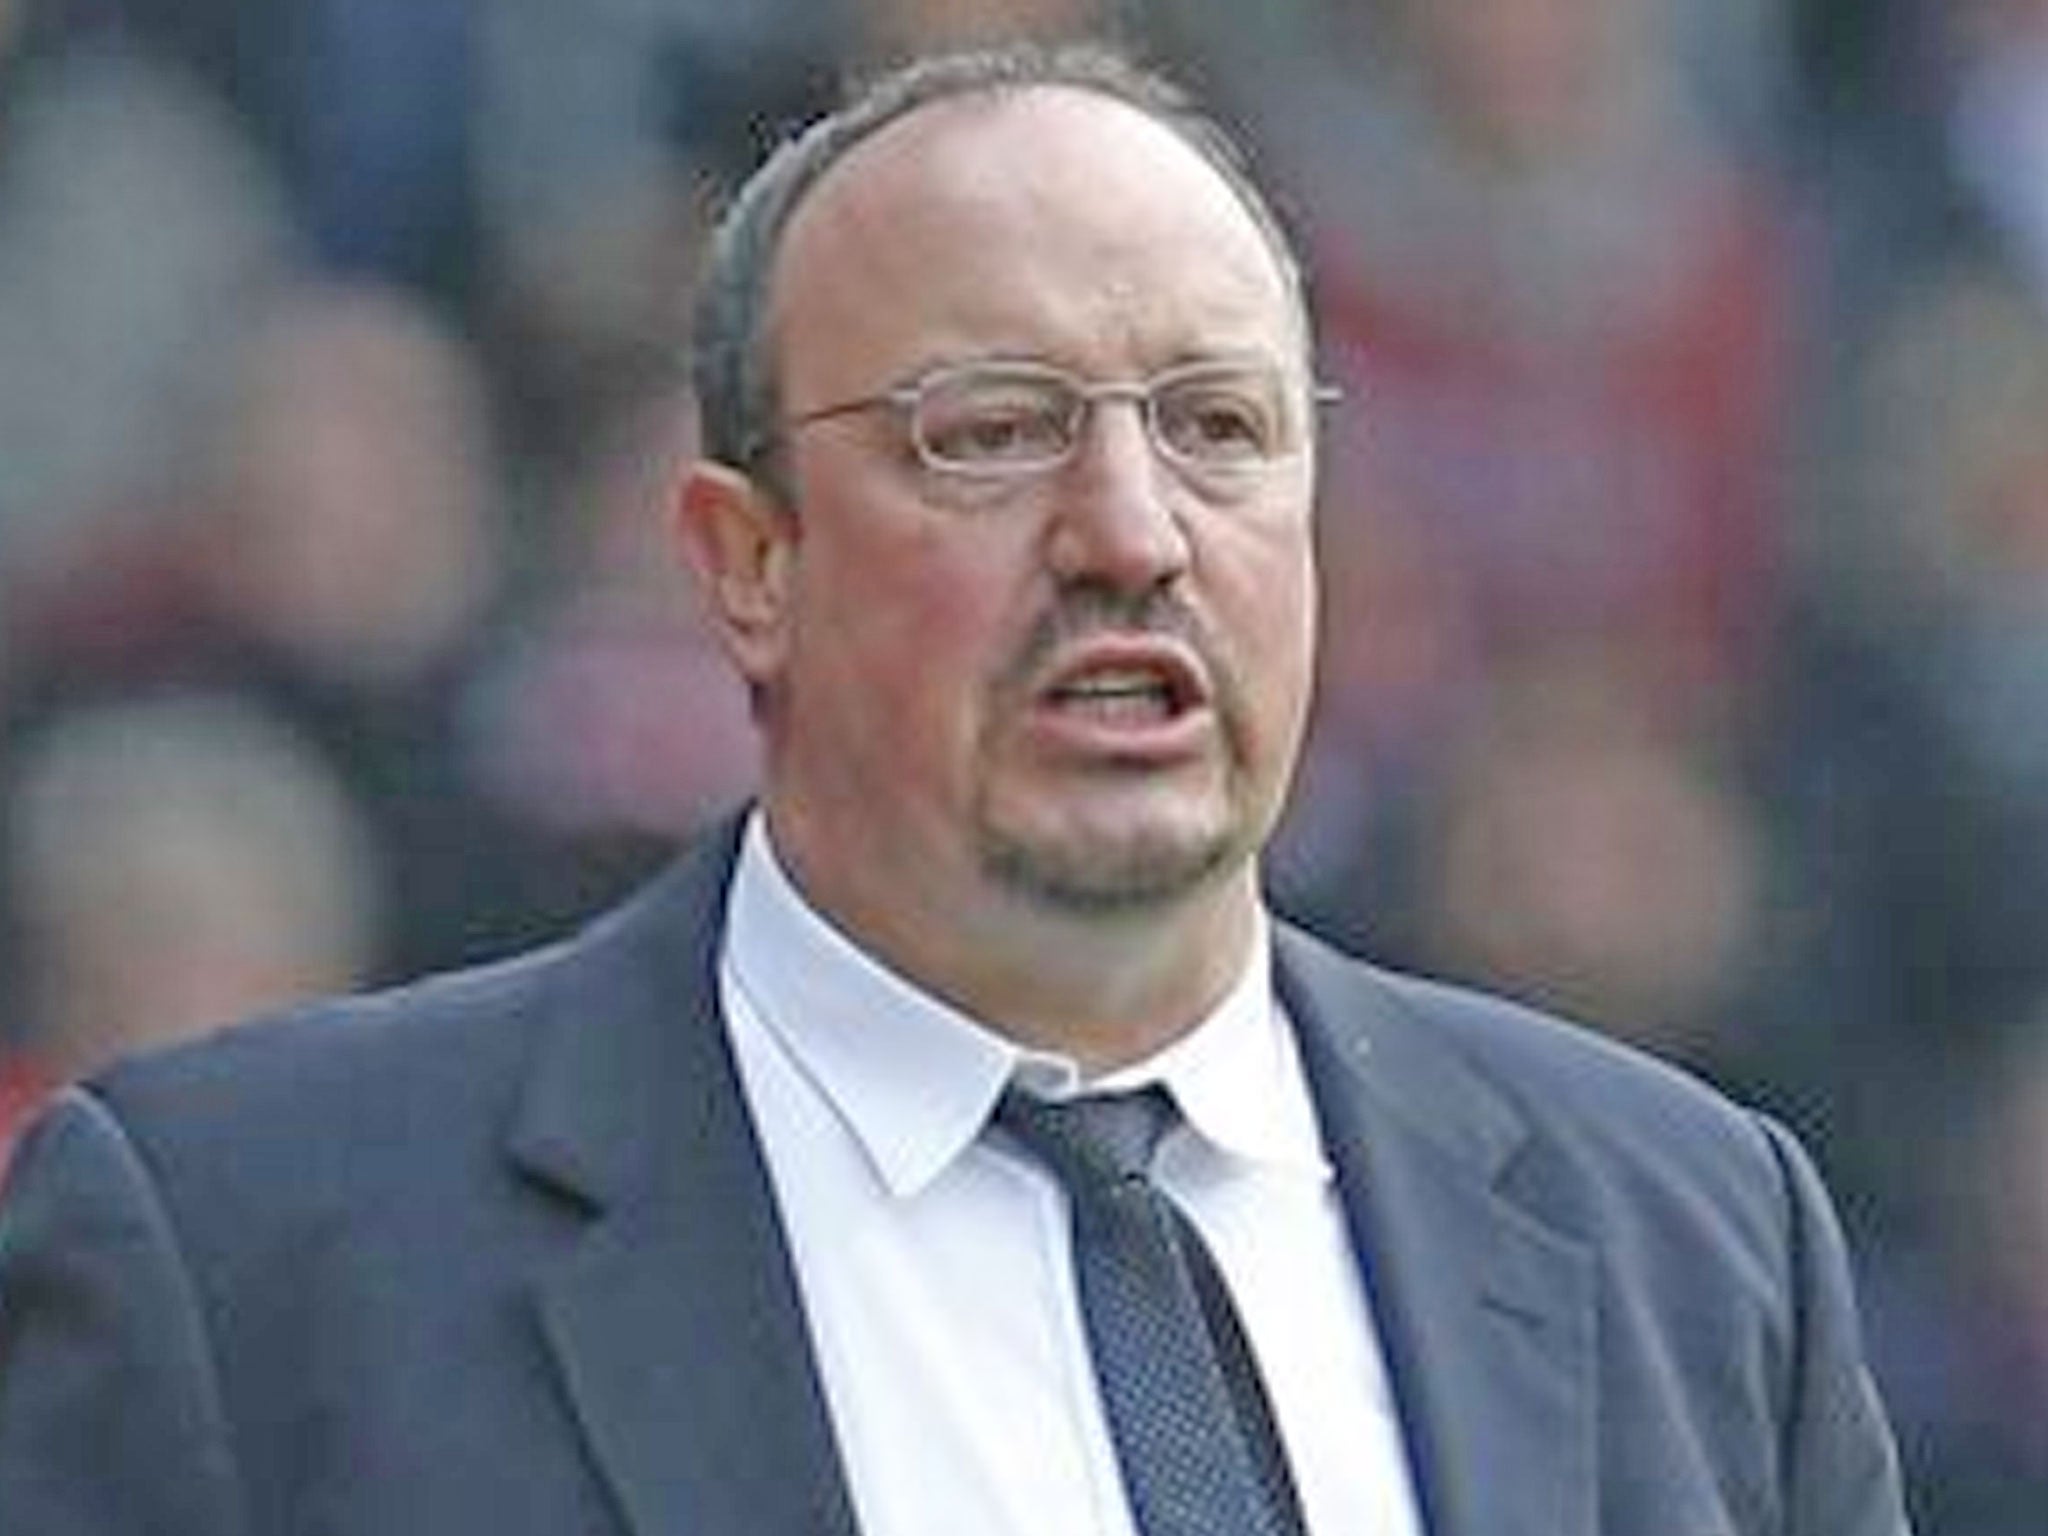 Rafael Benitez: The Spaniard is the ninth man in charge at Chelsea in the Abramovich era